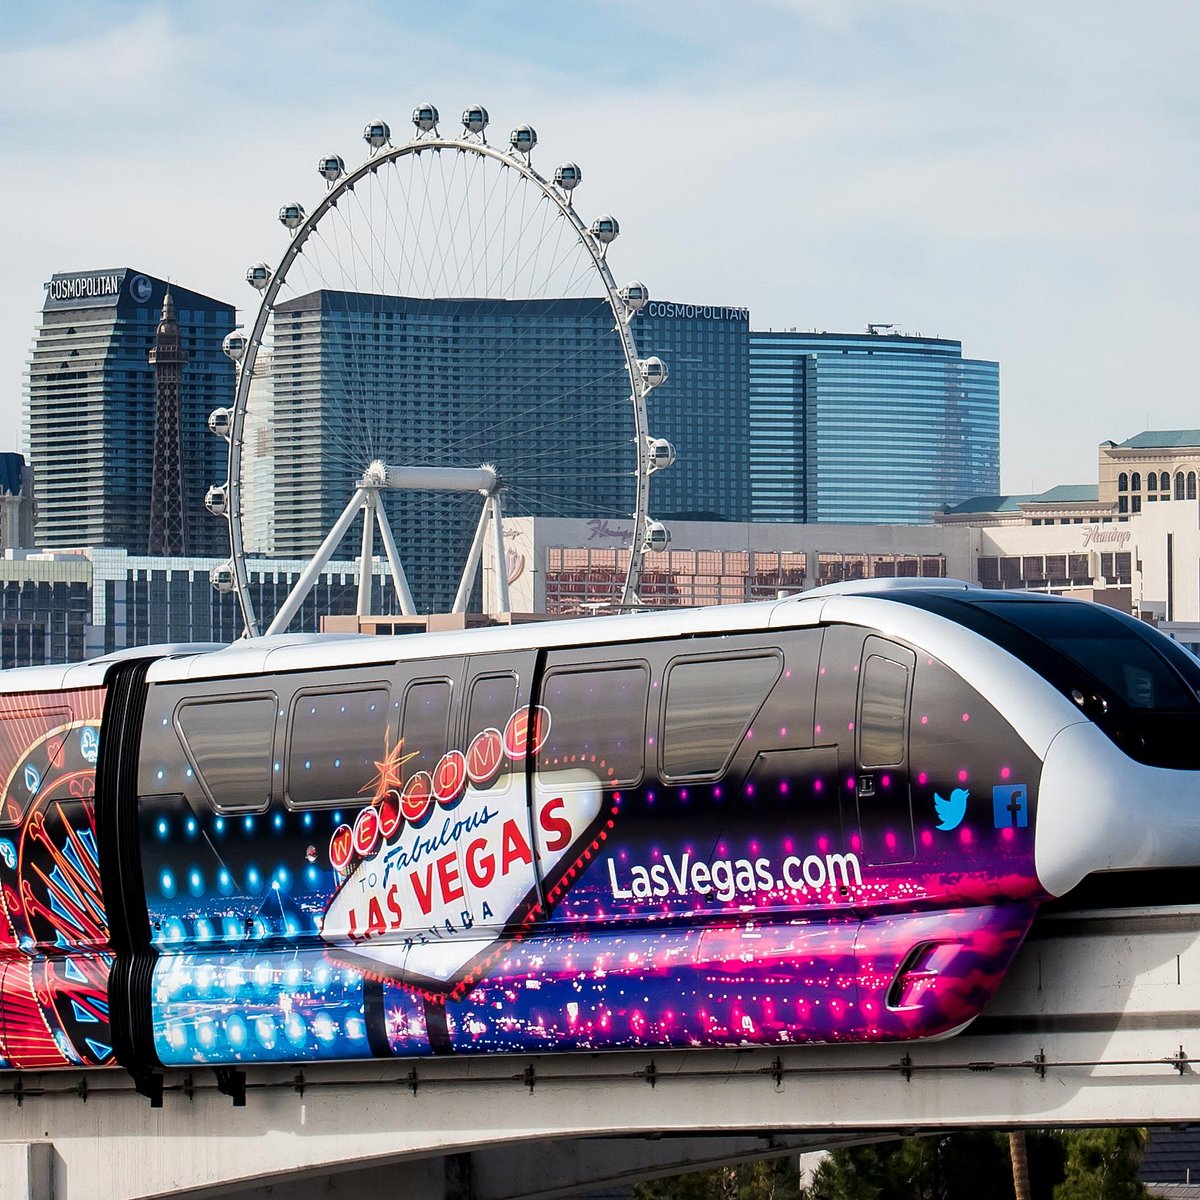 Las Vegas Monorail All You Need To Know Before You Go